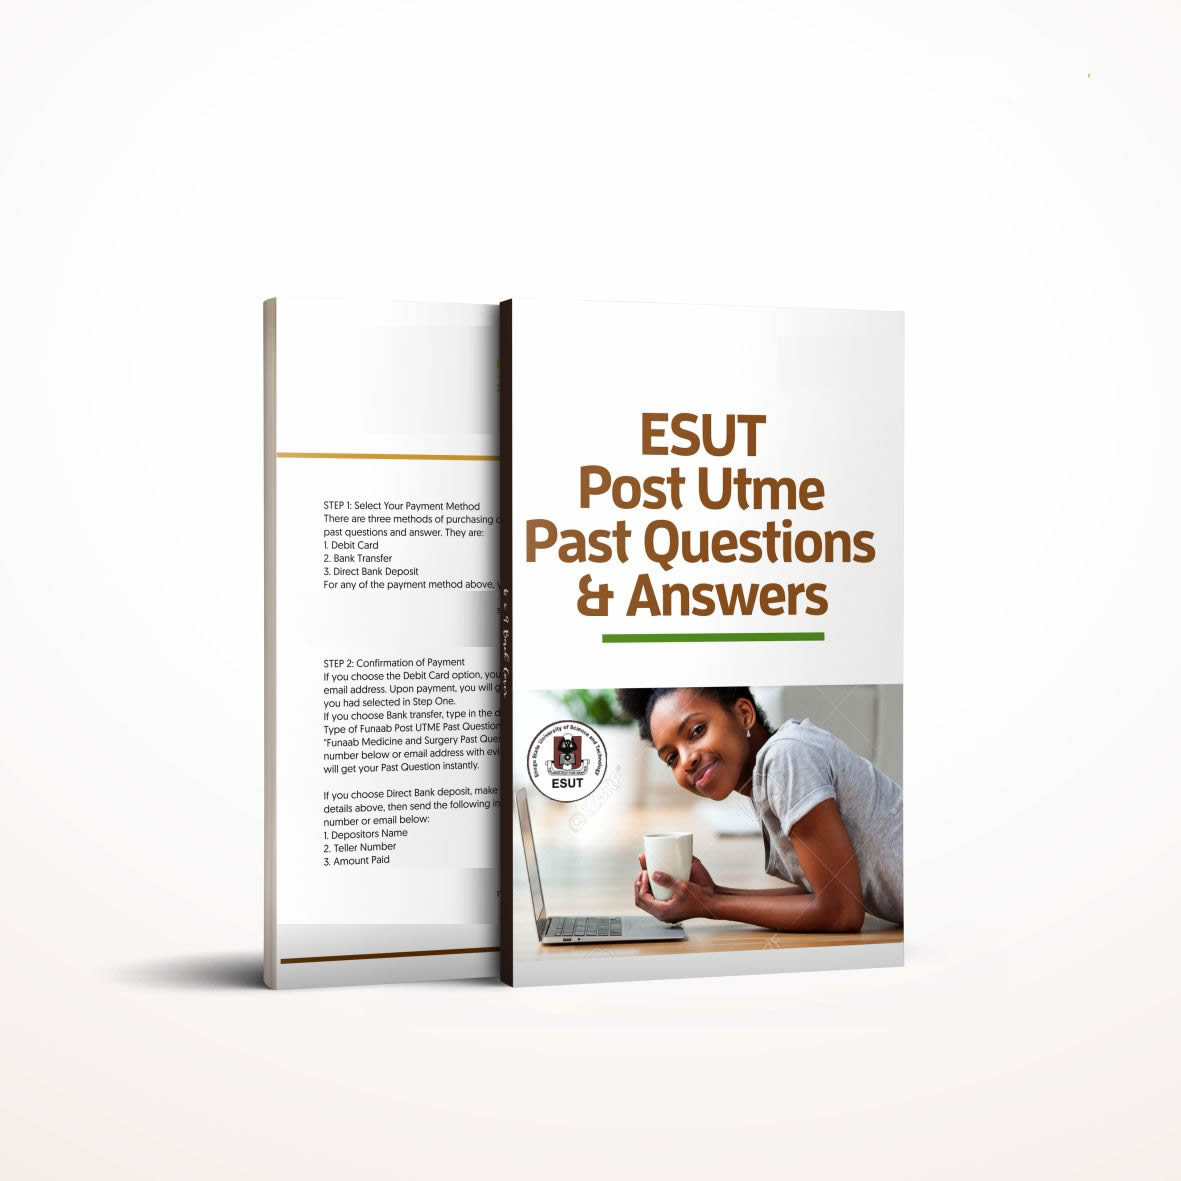 ESUT Post UTME past questions and answers